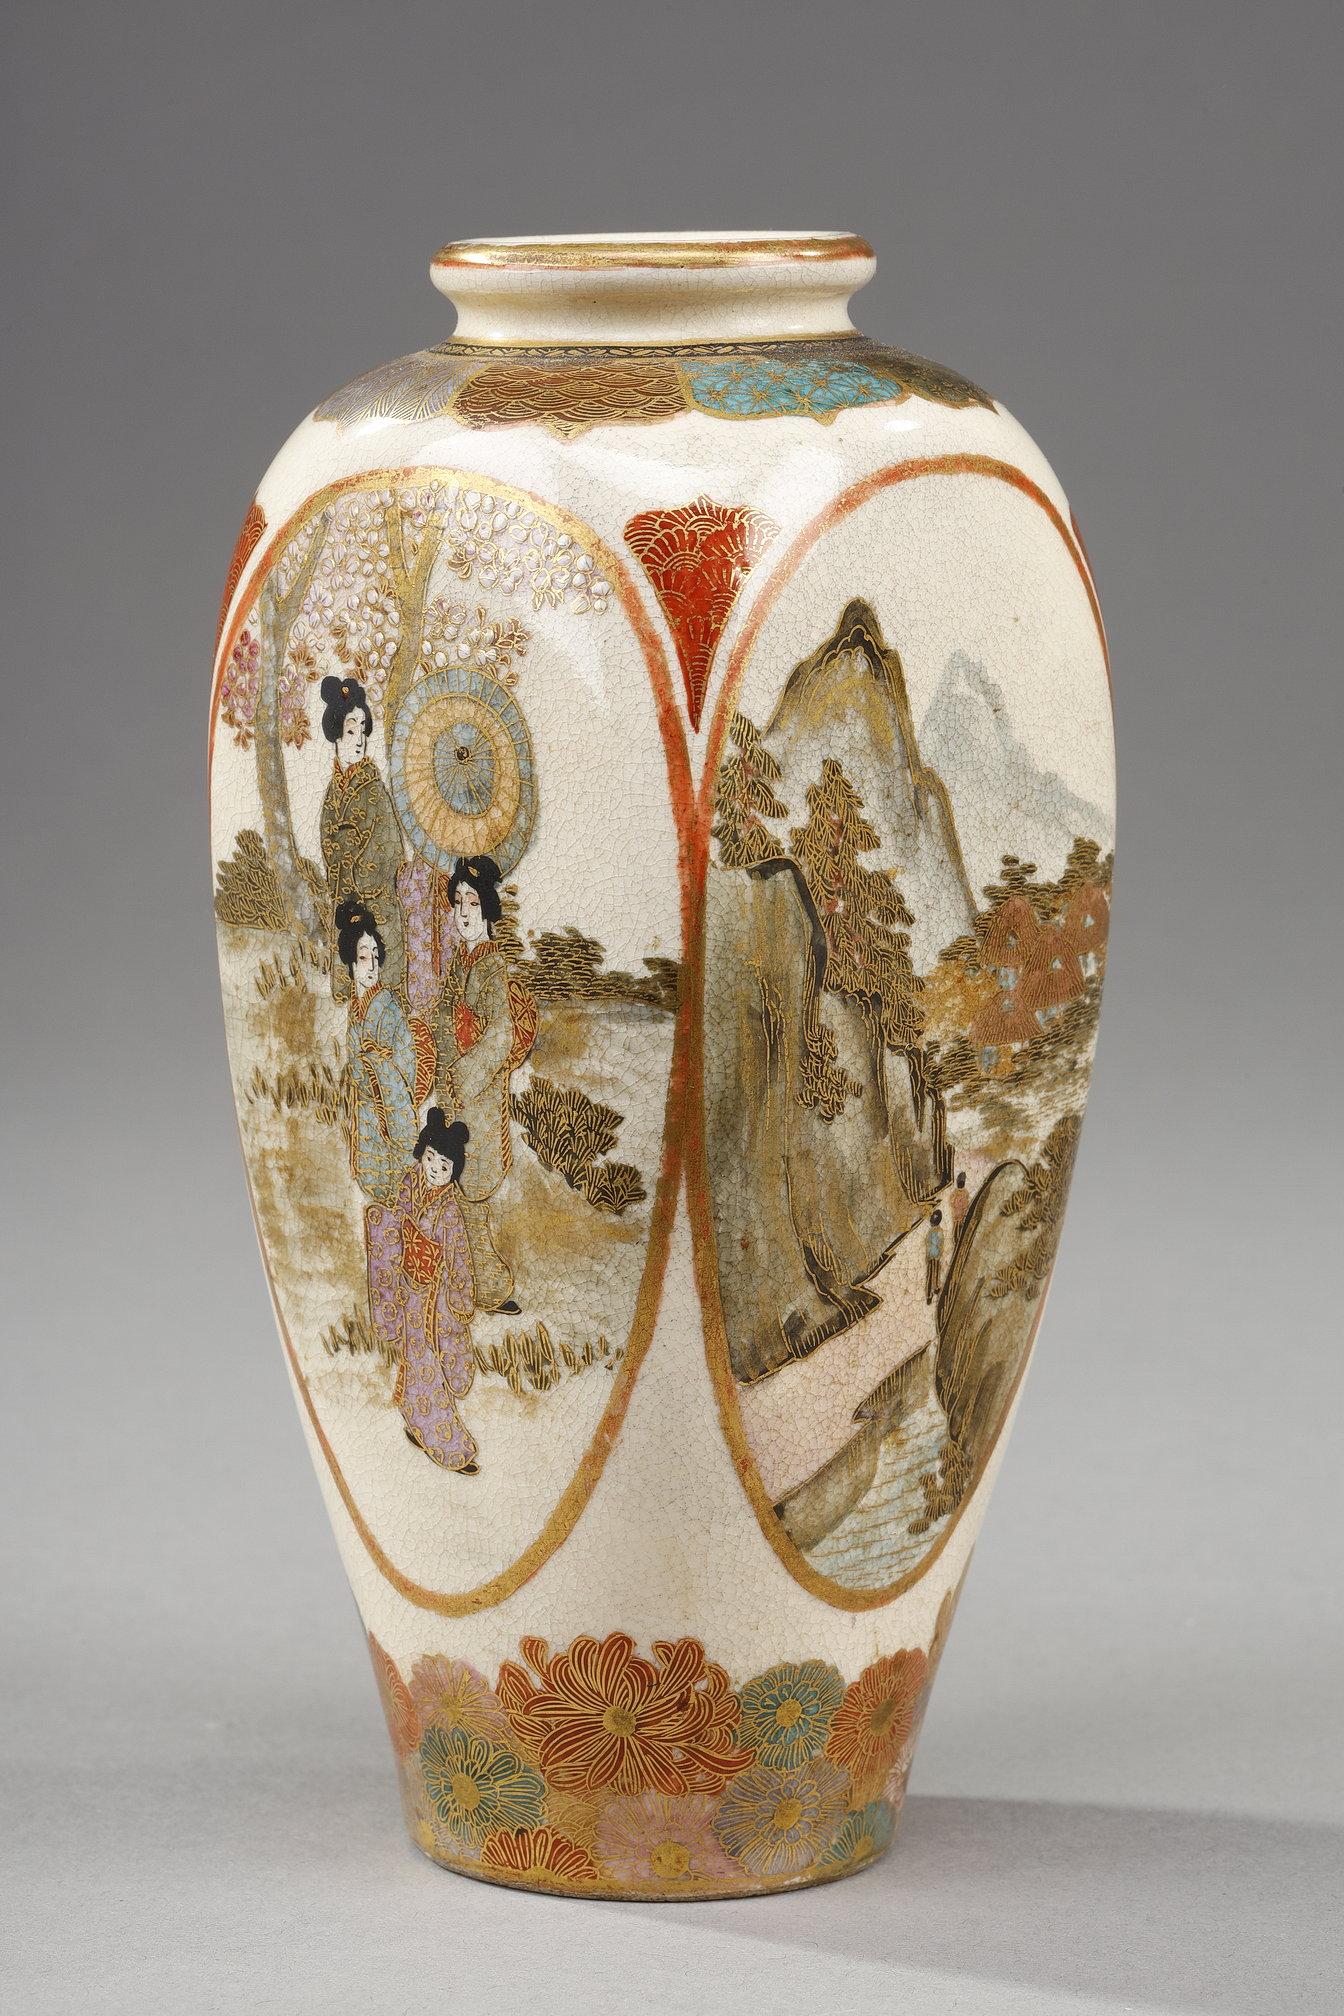 Small porcelain vase in Satsuma earthenware. The 4-sided body is decorated in polychrome and gold enamels with geishas in a garden, a mountain landscape, a bird on a flowering branch, and a temple in nature. Japan, Meiji period (1868-1912). Satsuma